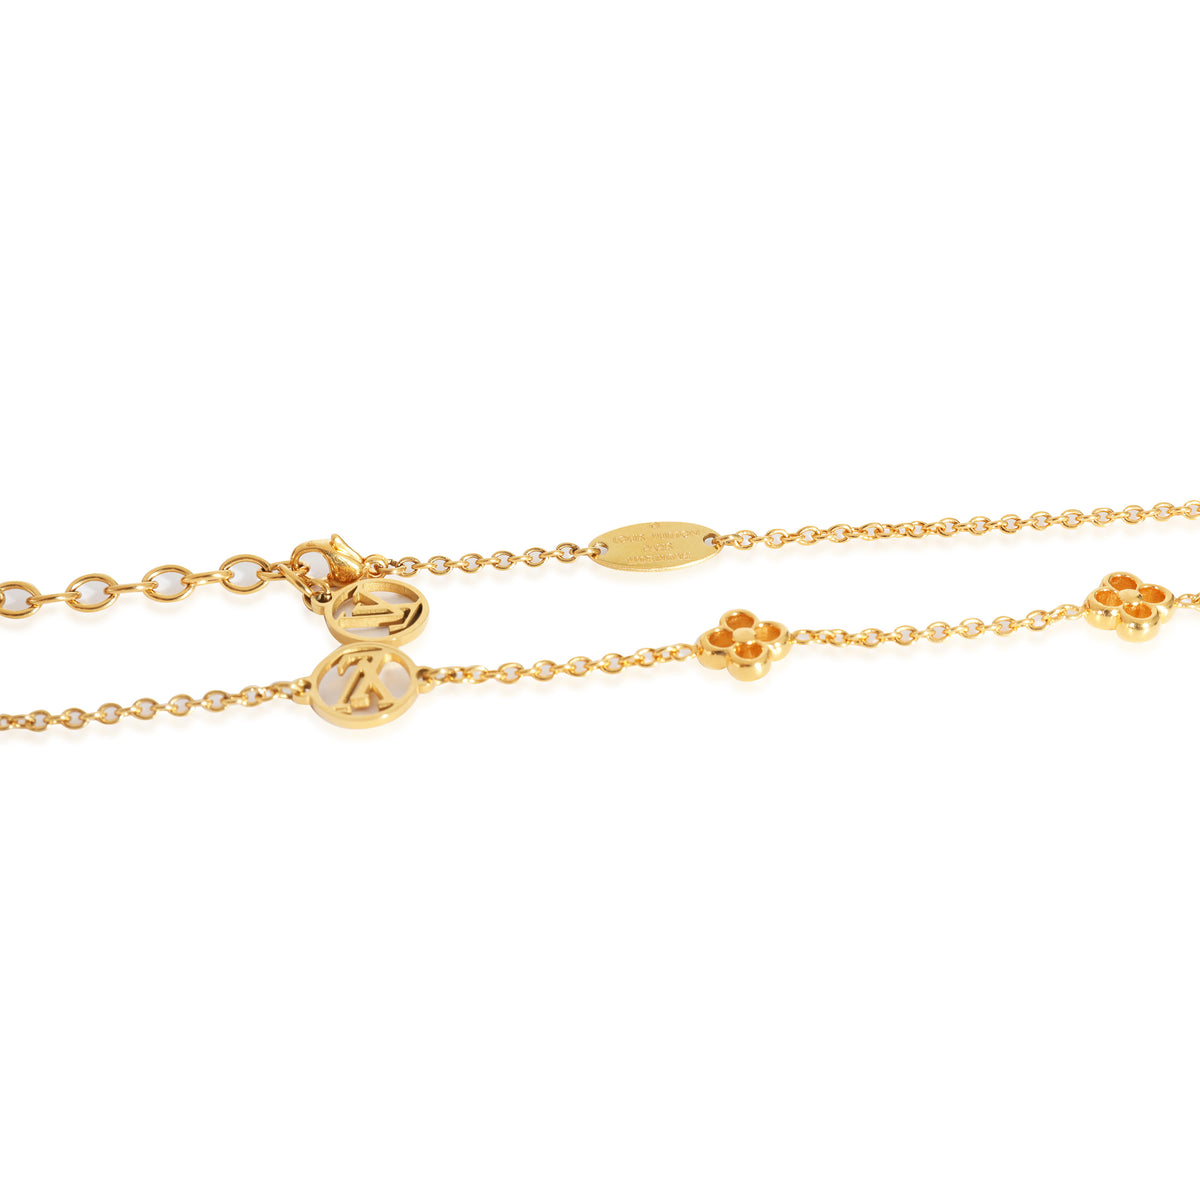 Louis Vuitton My Blooming Strass Necklace, Gold, One Size